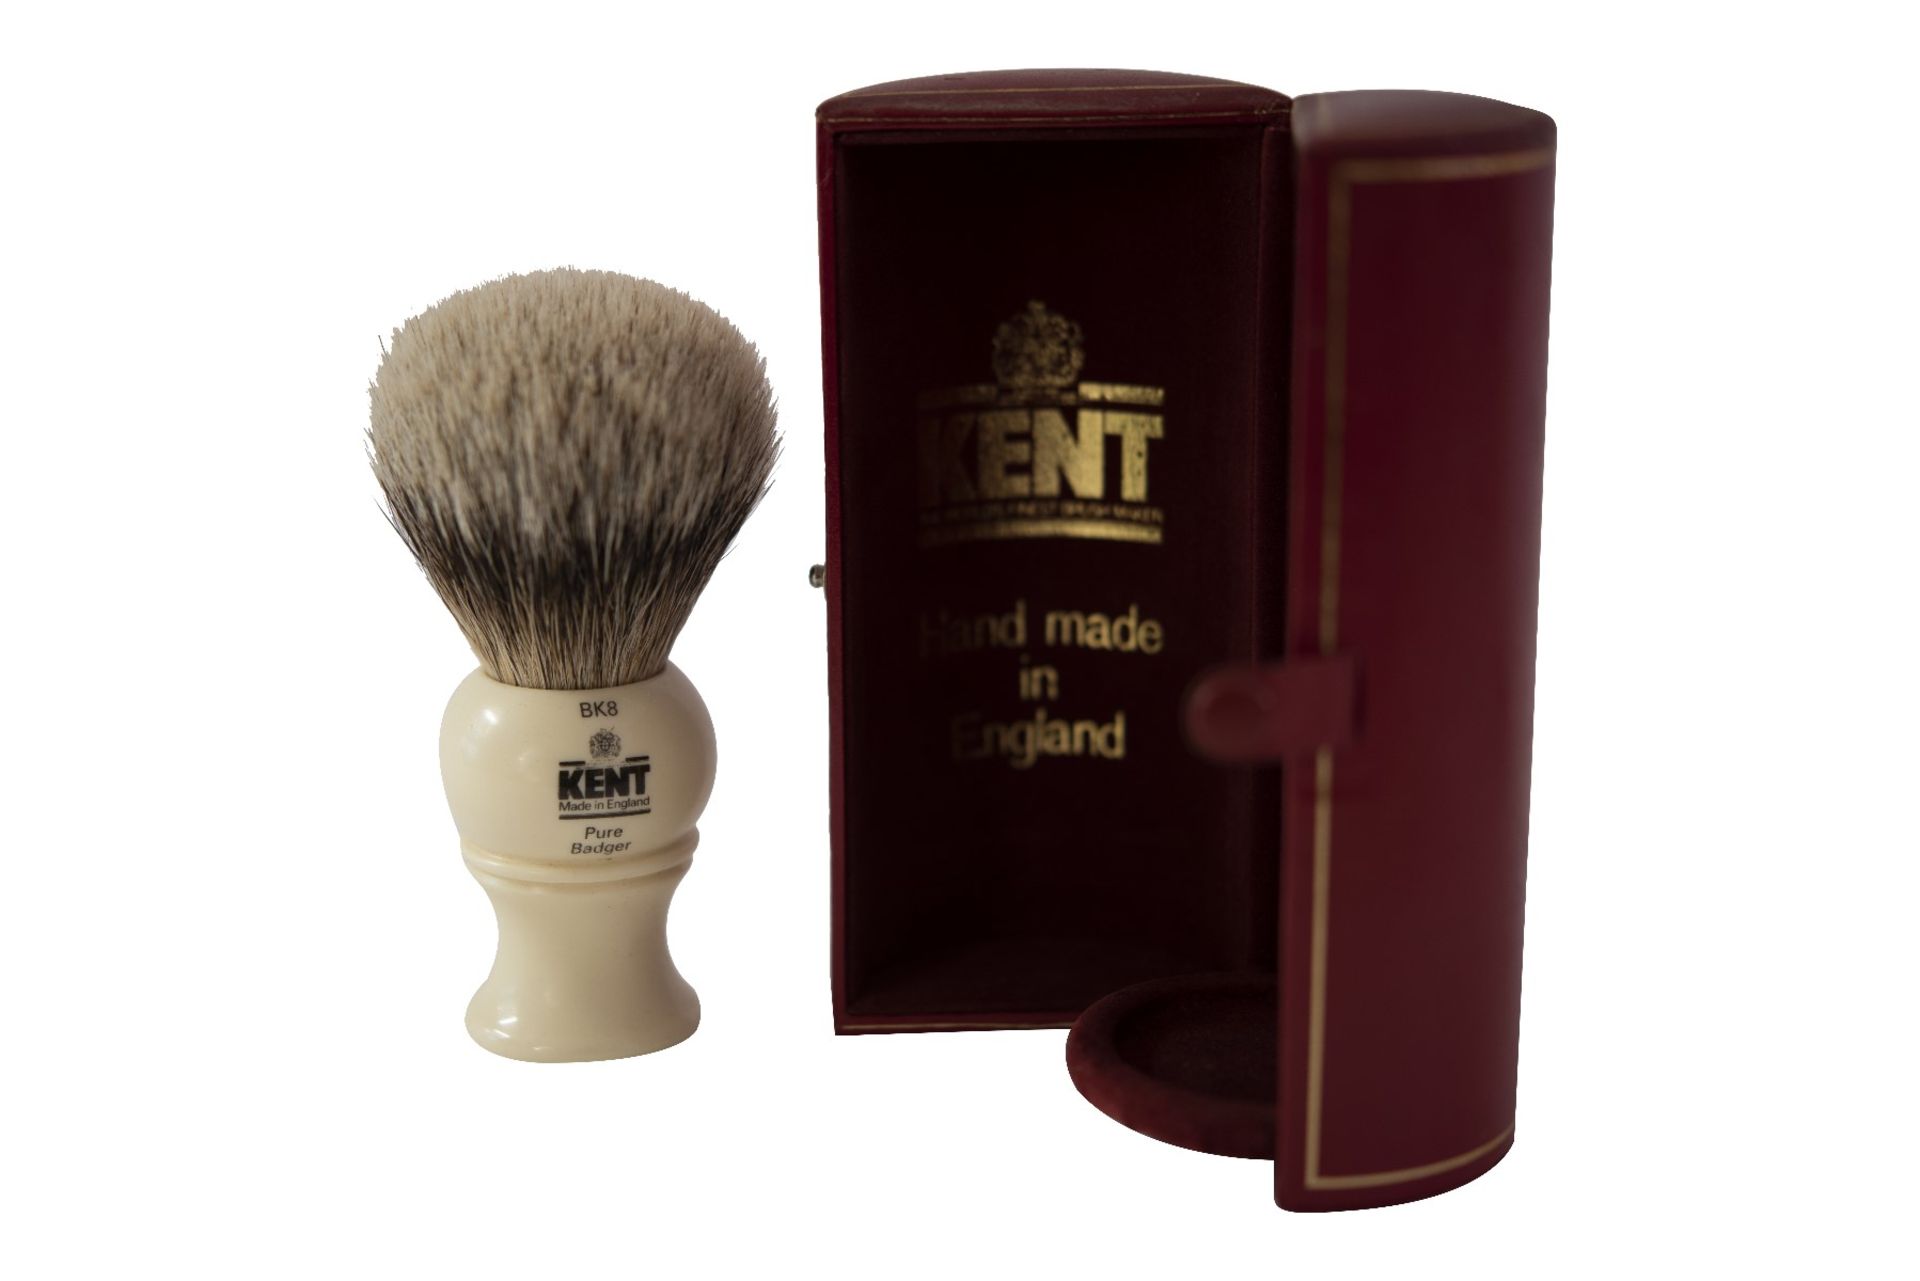 Kent shaving brush together with case - Image 2 of 4